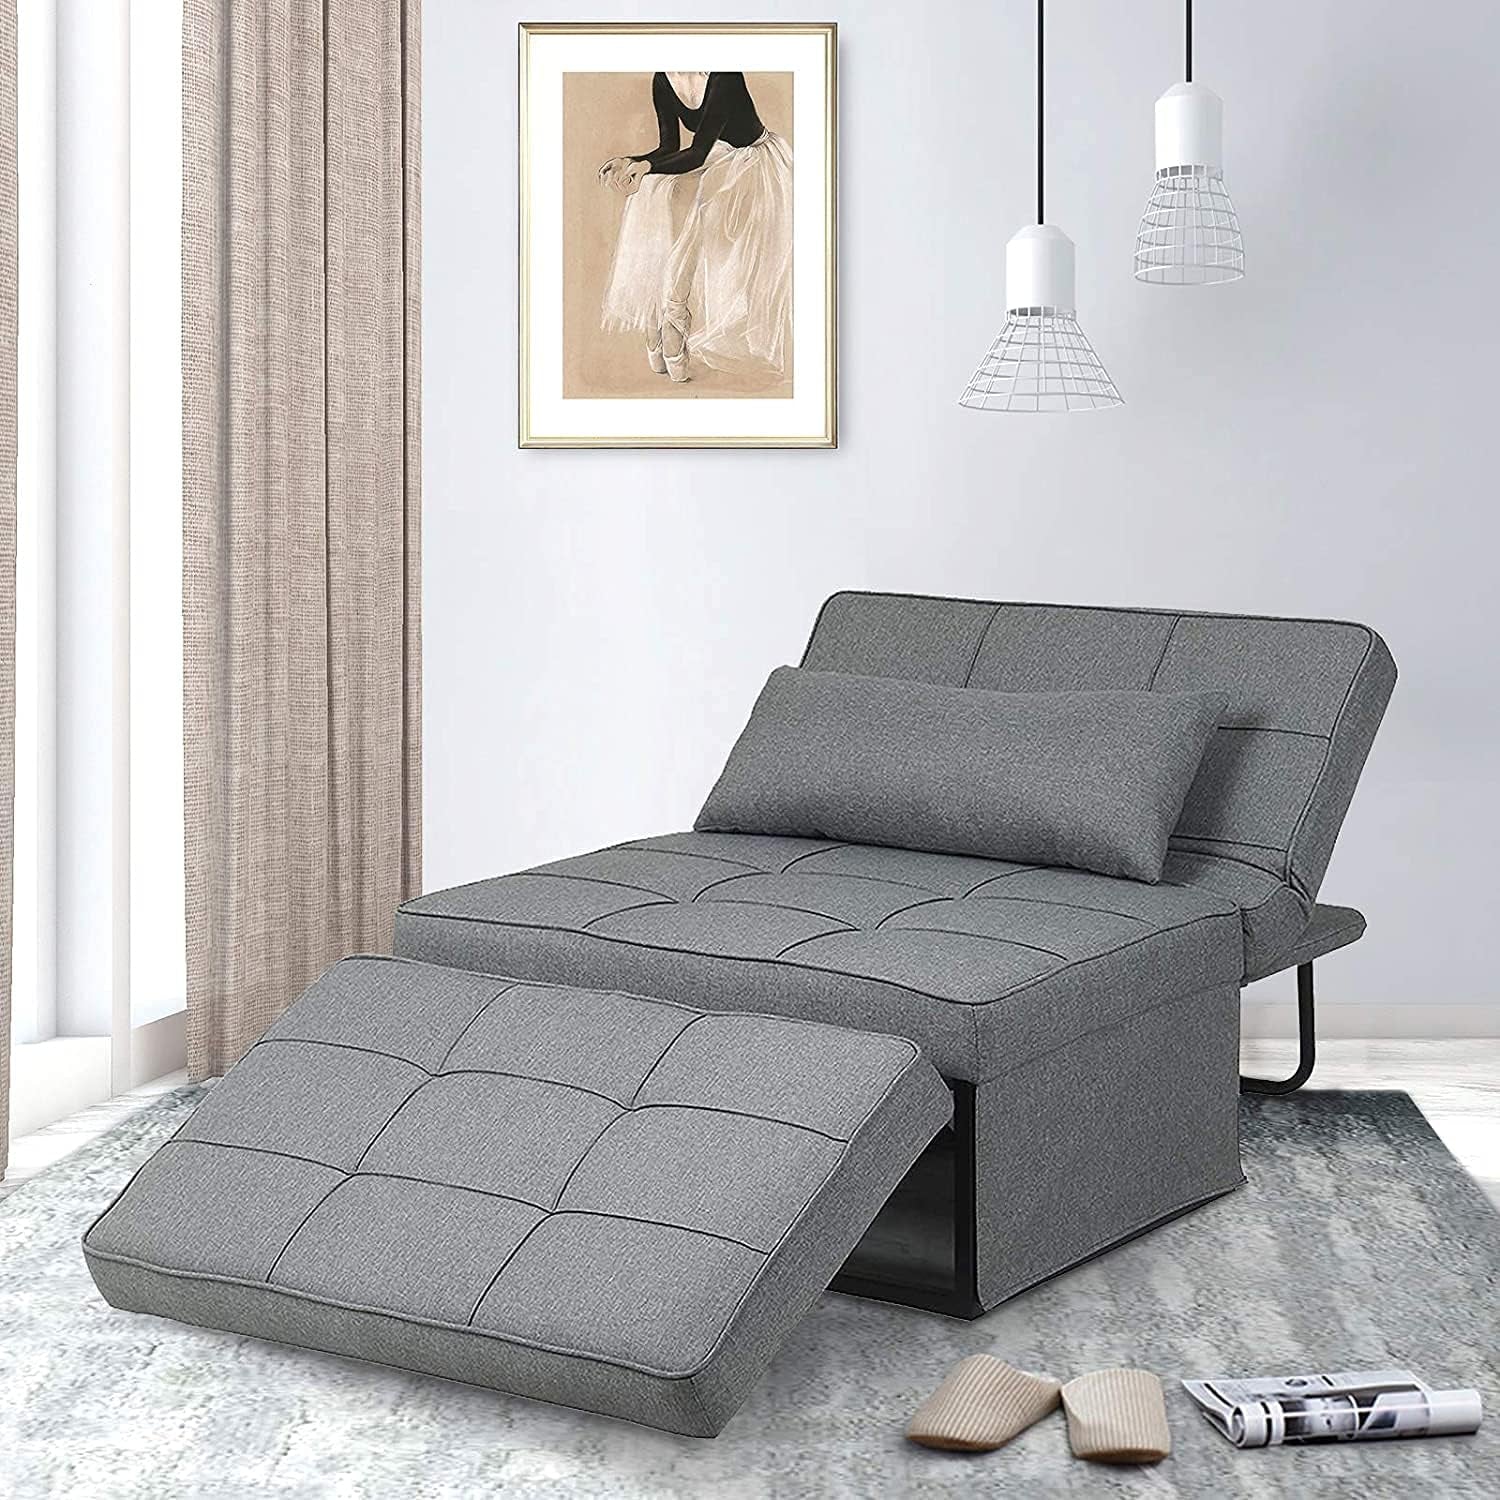 Sofa Bed, 4 in 1 Multi Function Folding Ottoman Sleeper Bed, Modern Convertible Chair Adjustable Backrest Sleeper Couch Bed for Living Room/Small Apartment, Light Gray